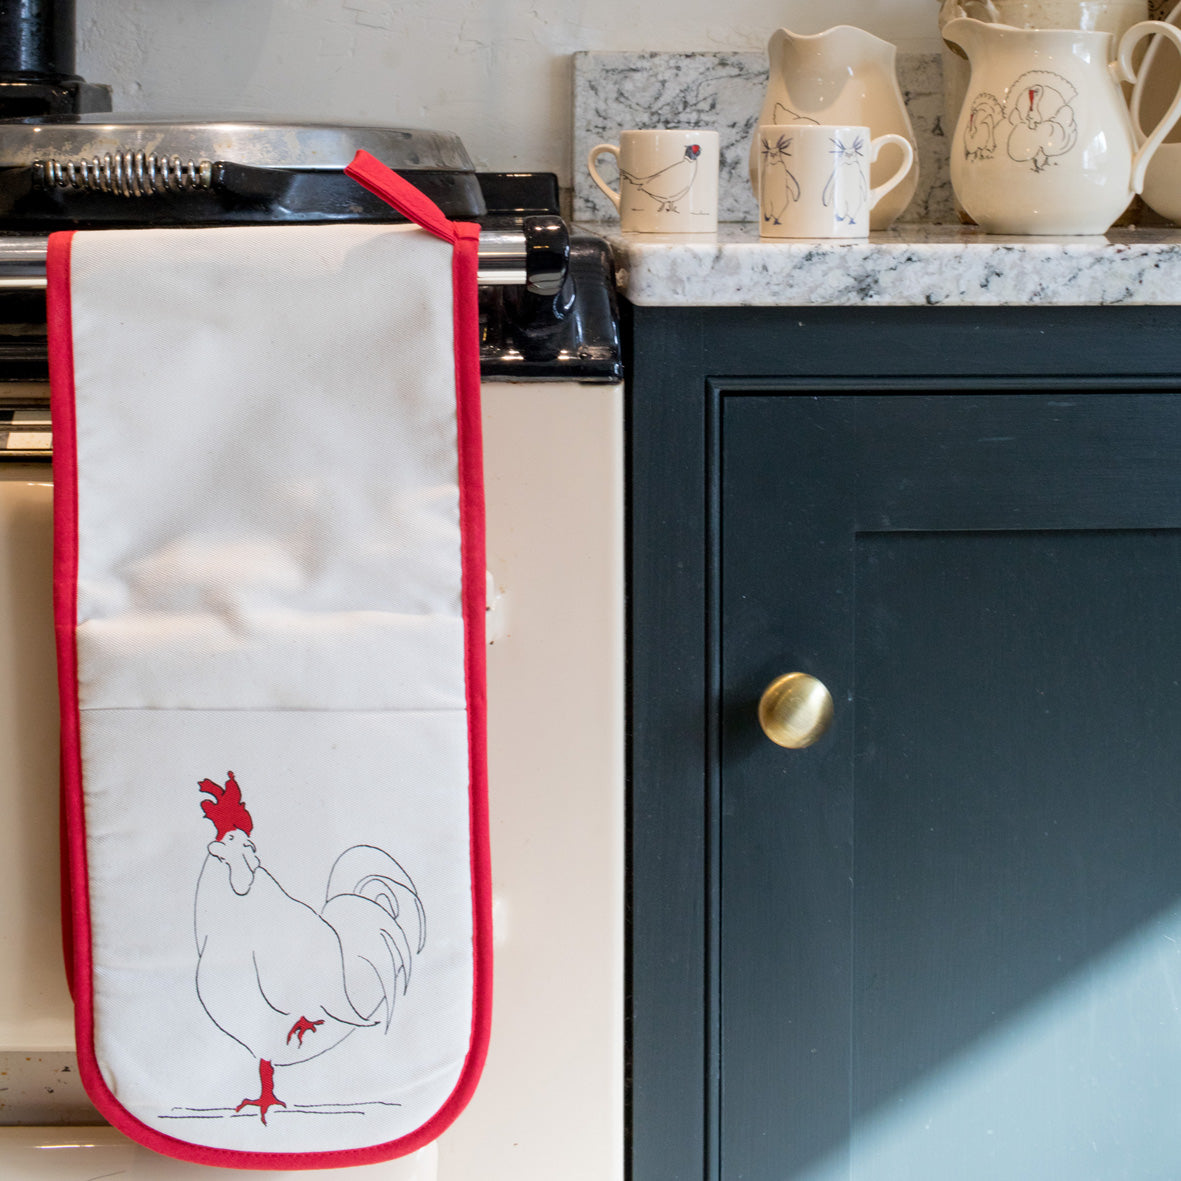 oven gloves with a rooster design and red underside